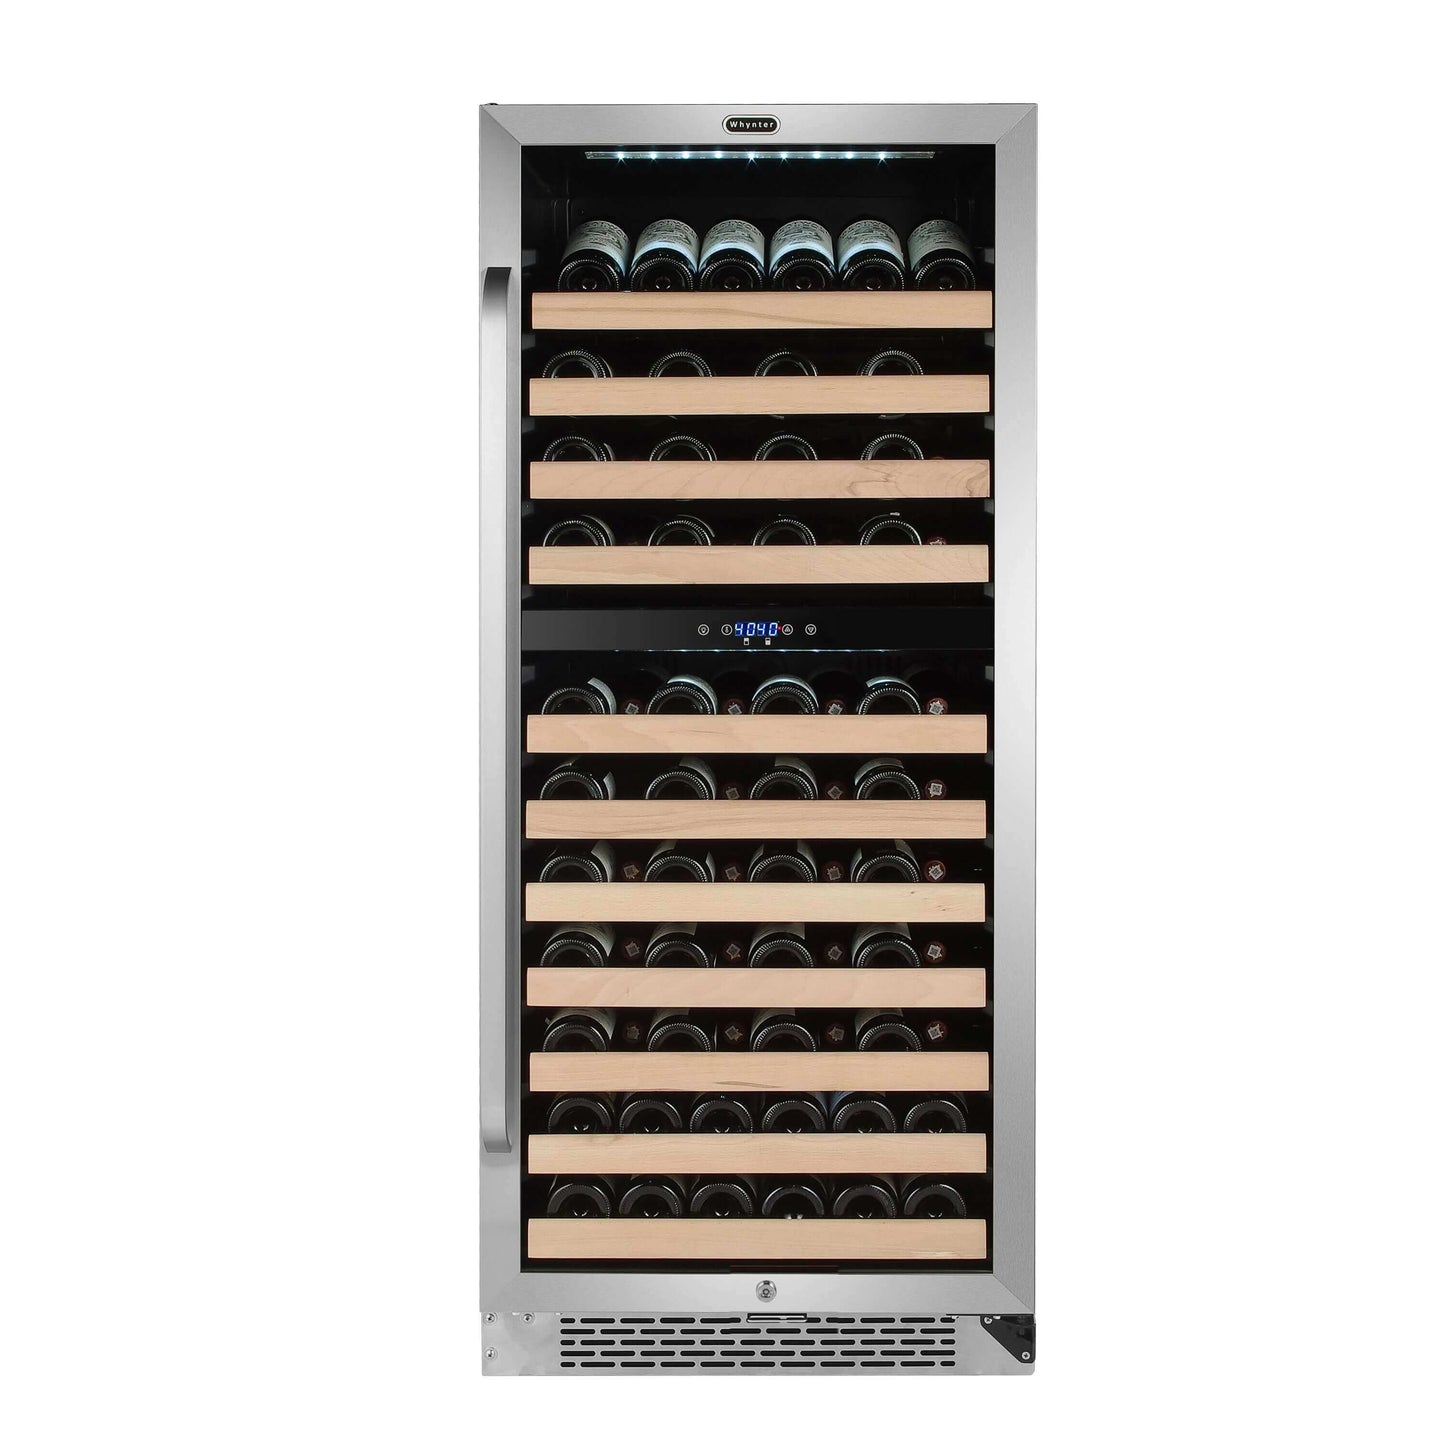 Whynter BWR-0922DZ/BWR-0922DZa 92 Bottle Built-in Stainless Steel Dual Zone Compressor Wine Refrigerator with Display Rack and LED display